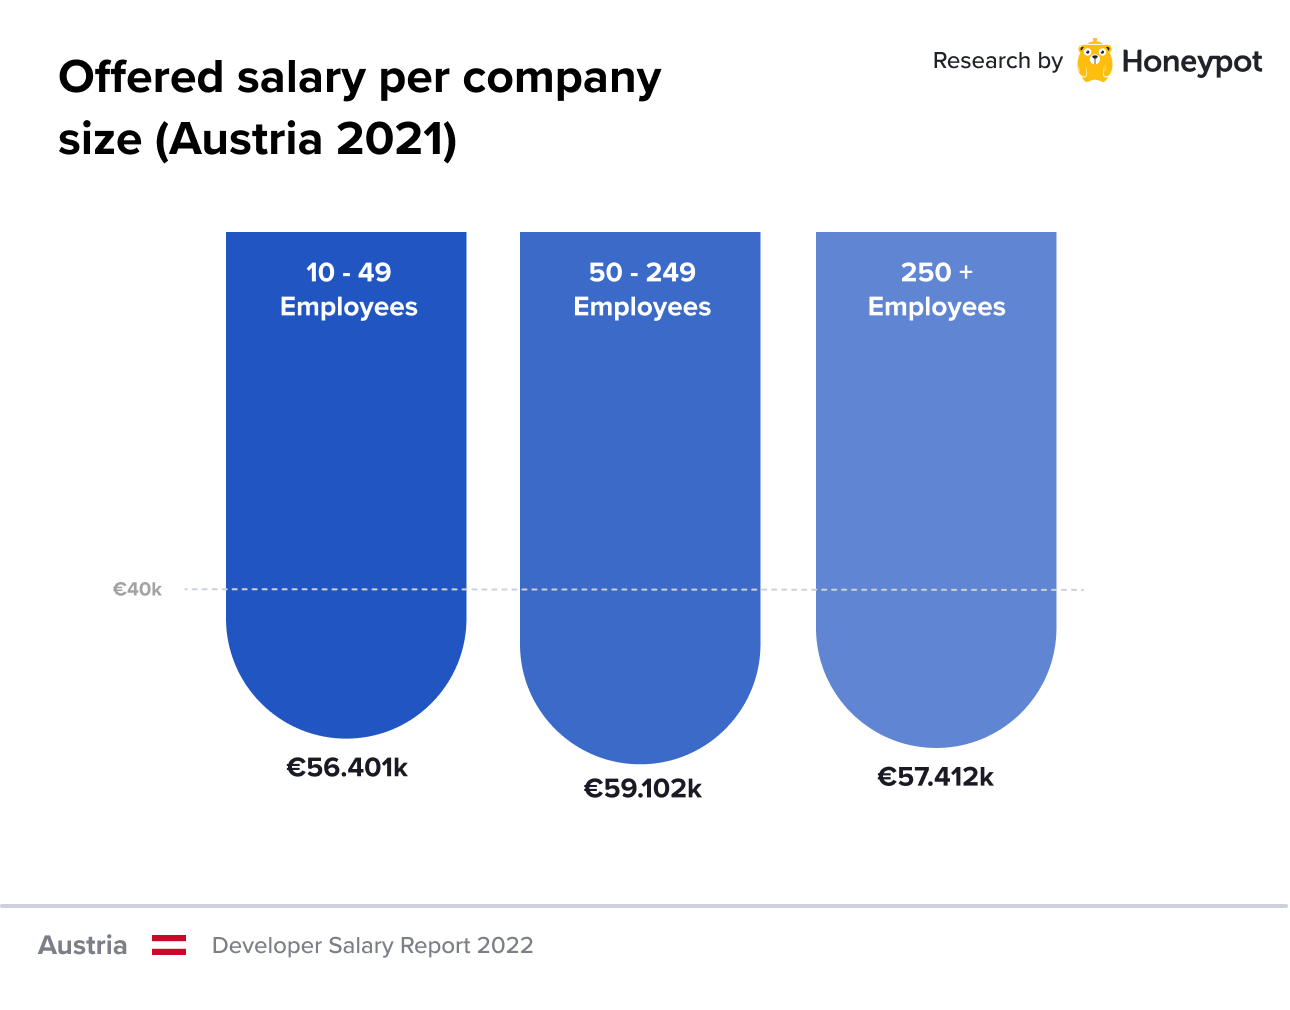 Offered salary per company size (Austria 2021)